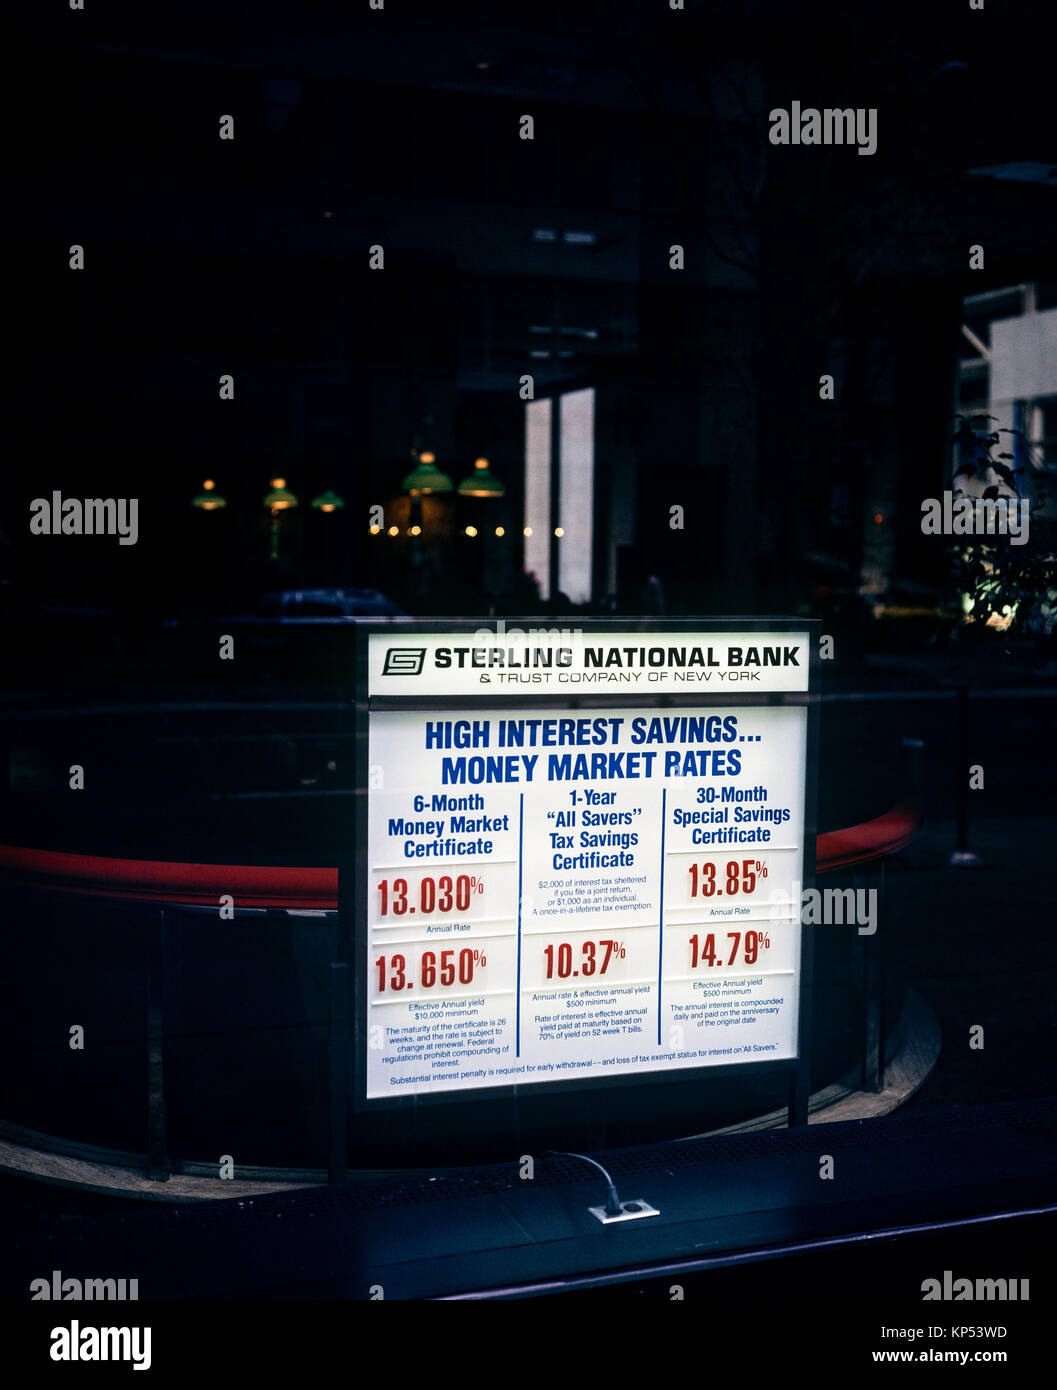 May 1982,New York,money market rates notice,high interest savings,Sterling National bank,branch office,Manhattan,New york City,NY,NYC,USA, Stock Photo